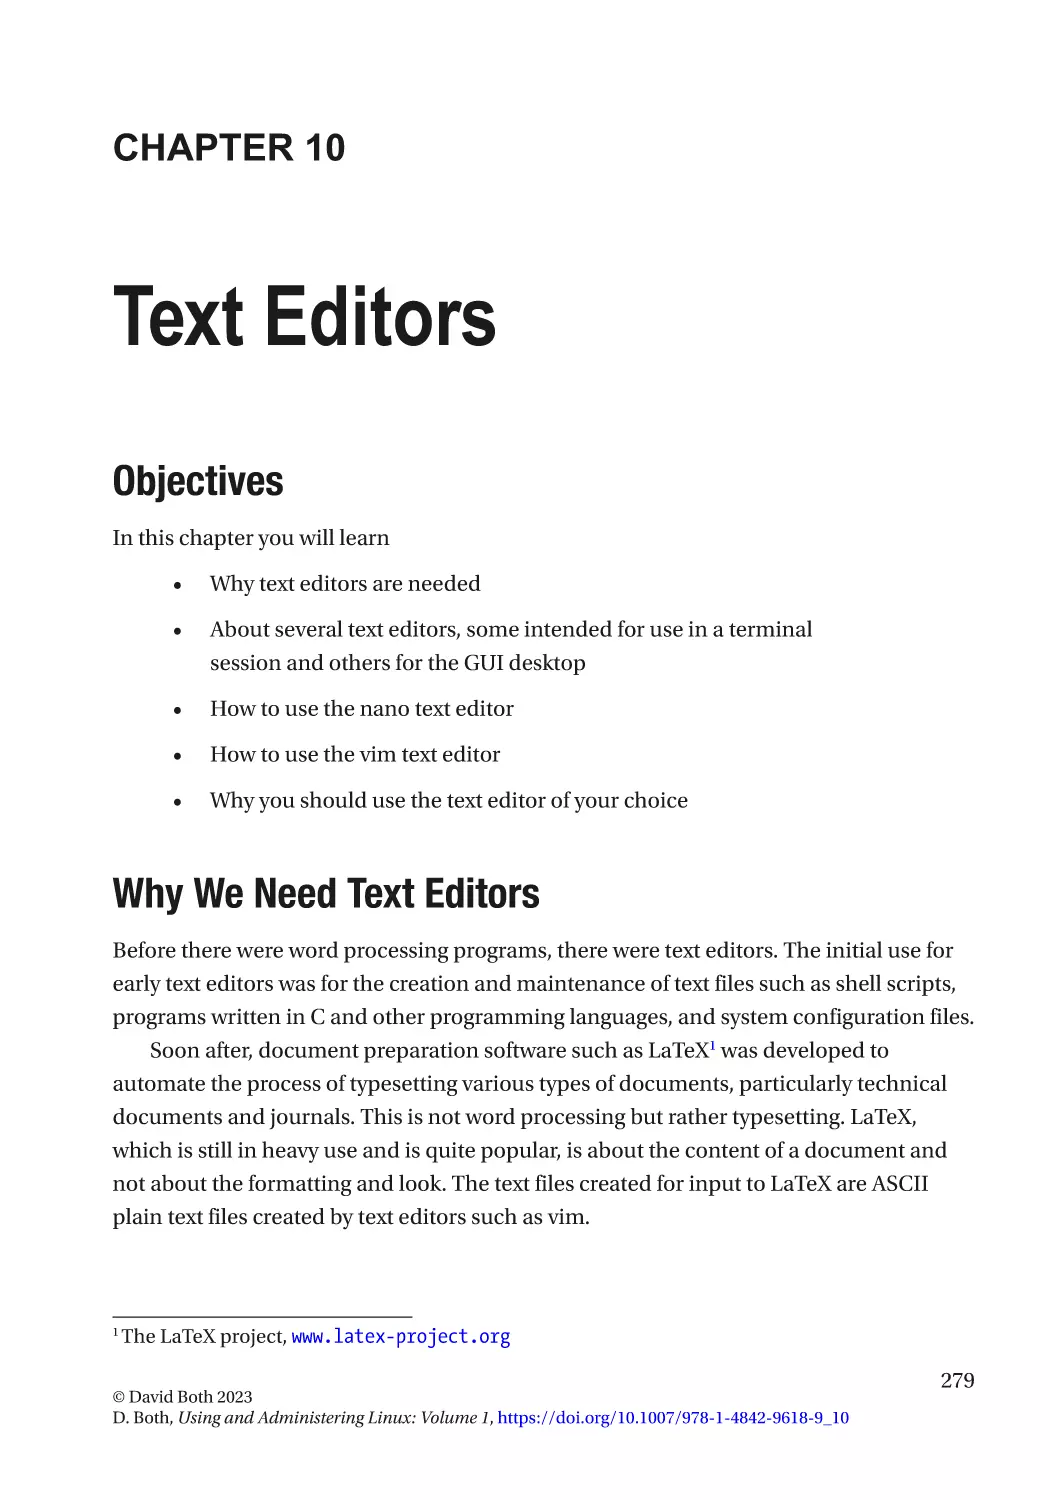 Chapter 10
Objectives
Why We Need Text Editors